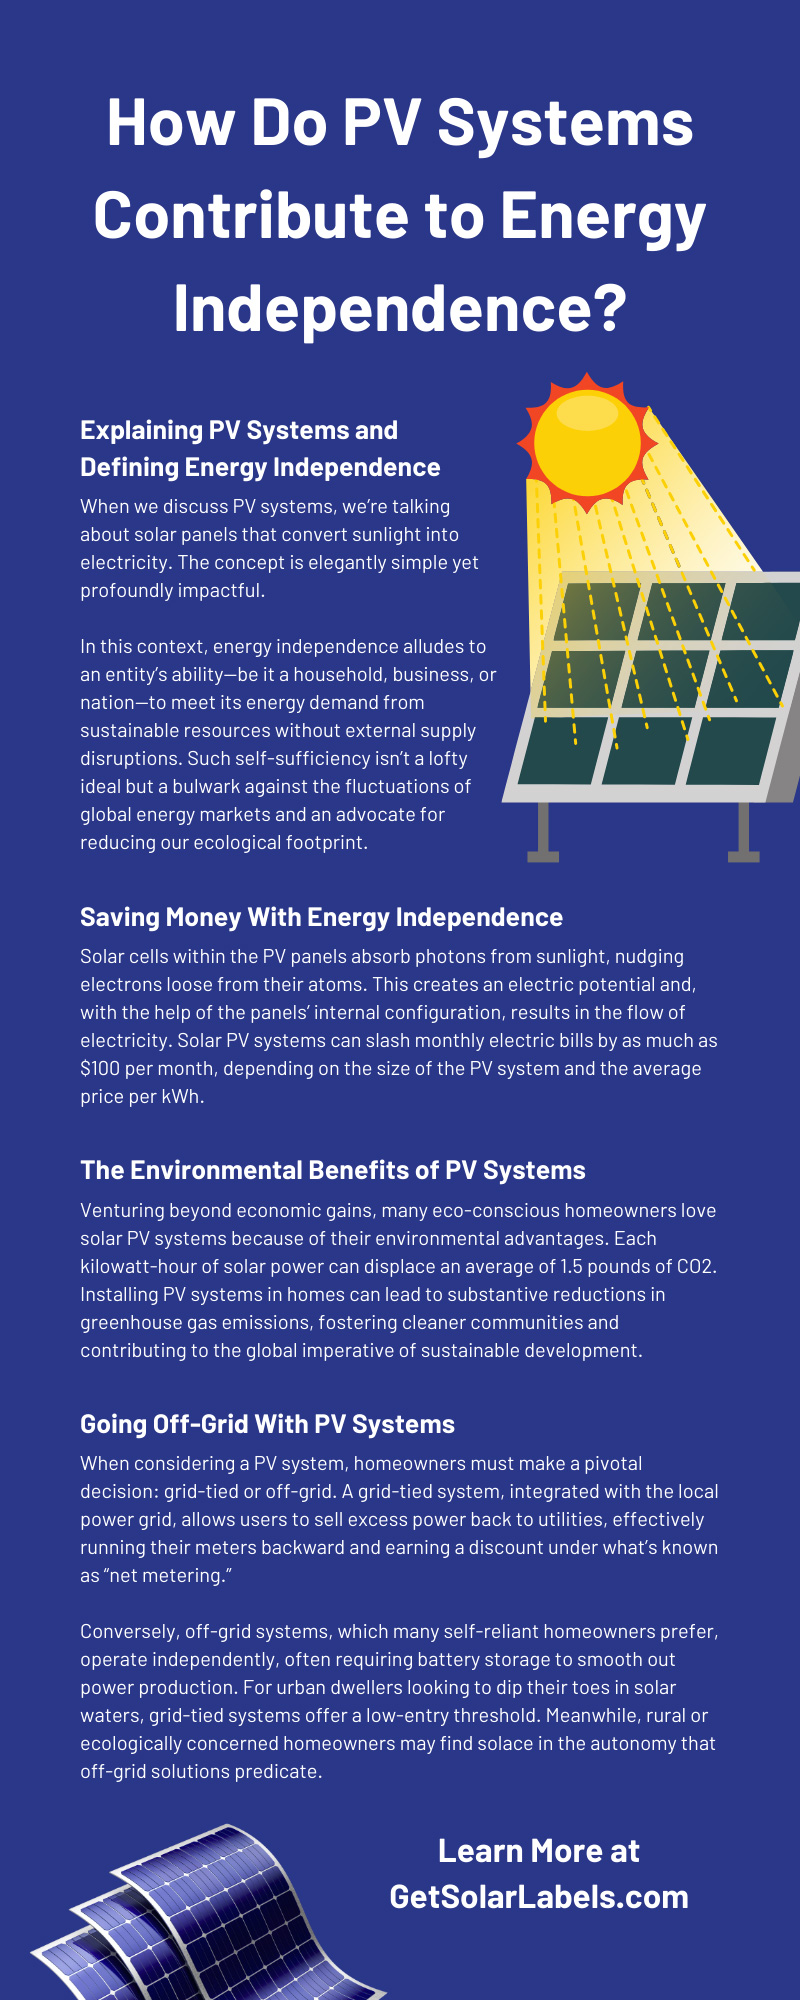 How Do PV Systems Contribute to Energy Independence?